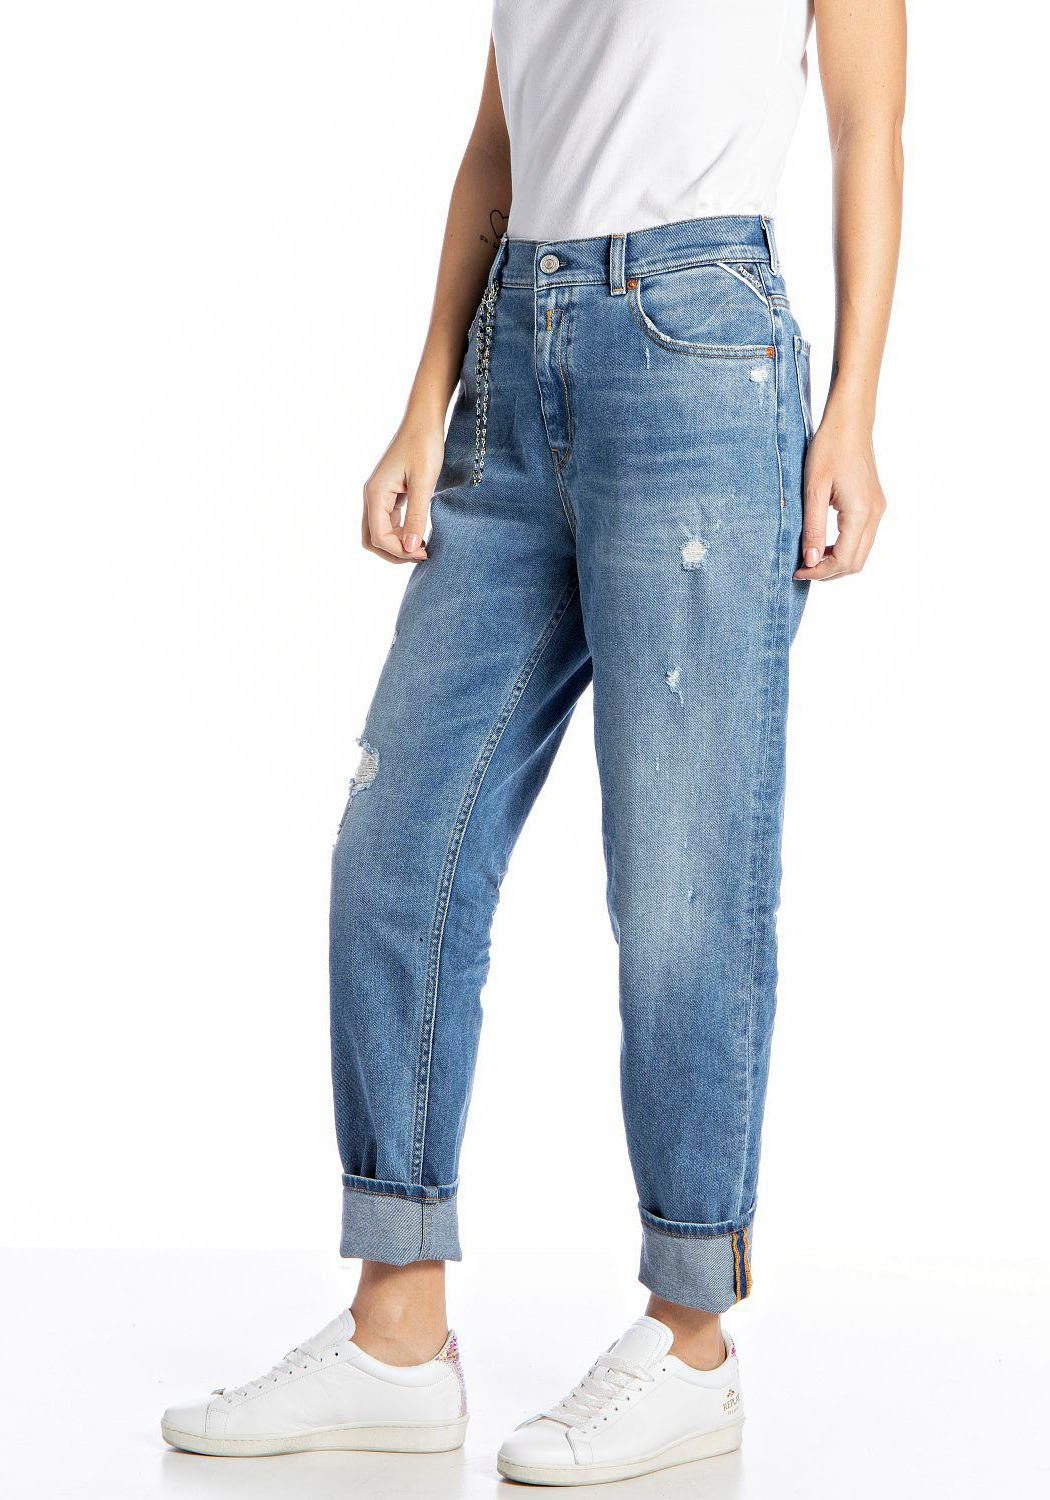 mit KILEY Replay Straight-Jeans Kettendetail Look im Used